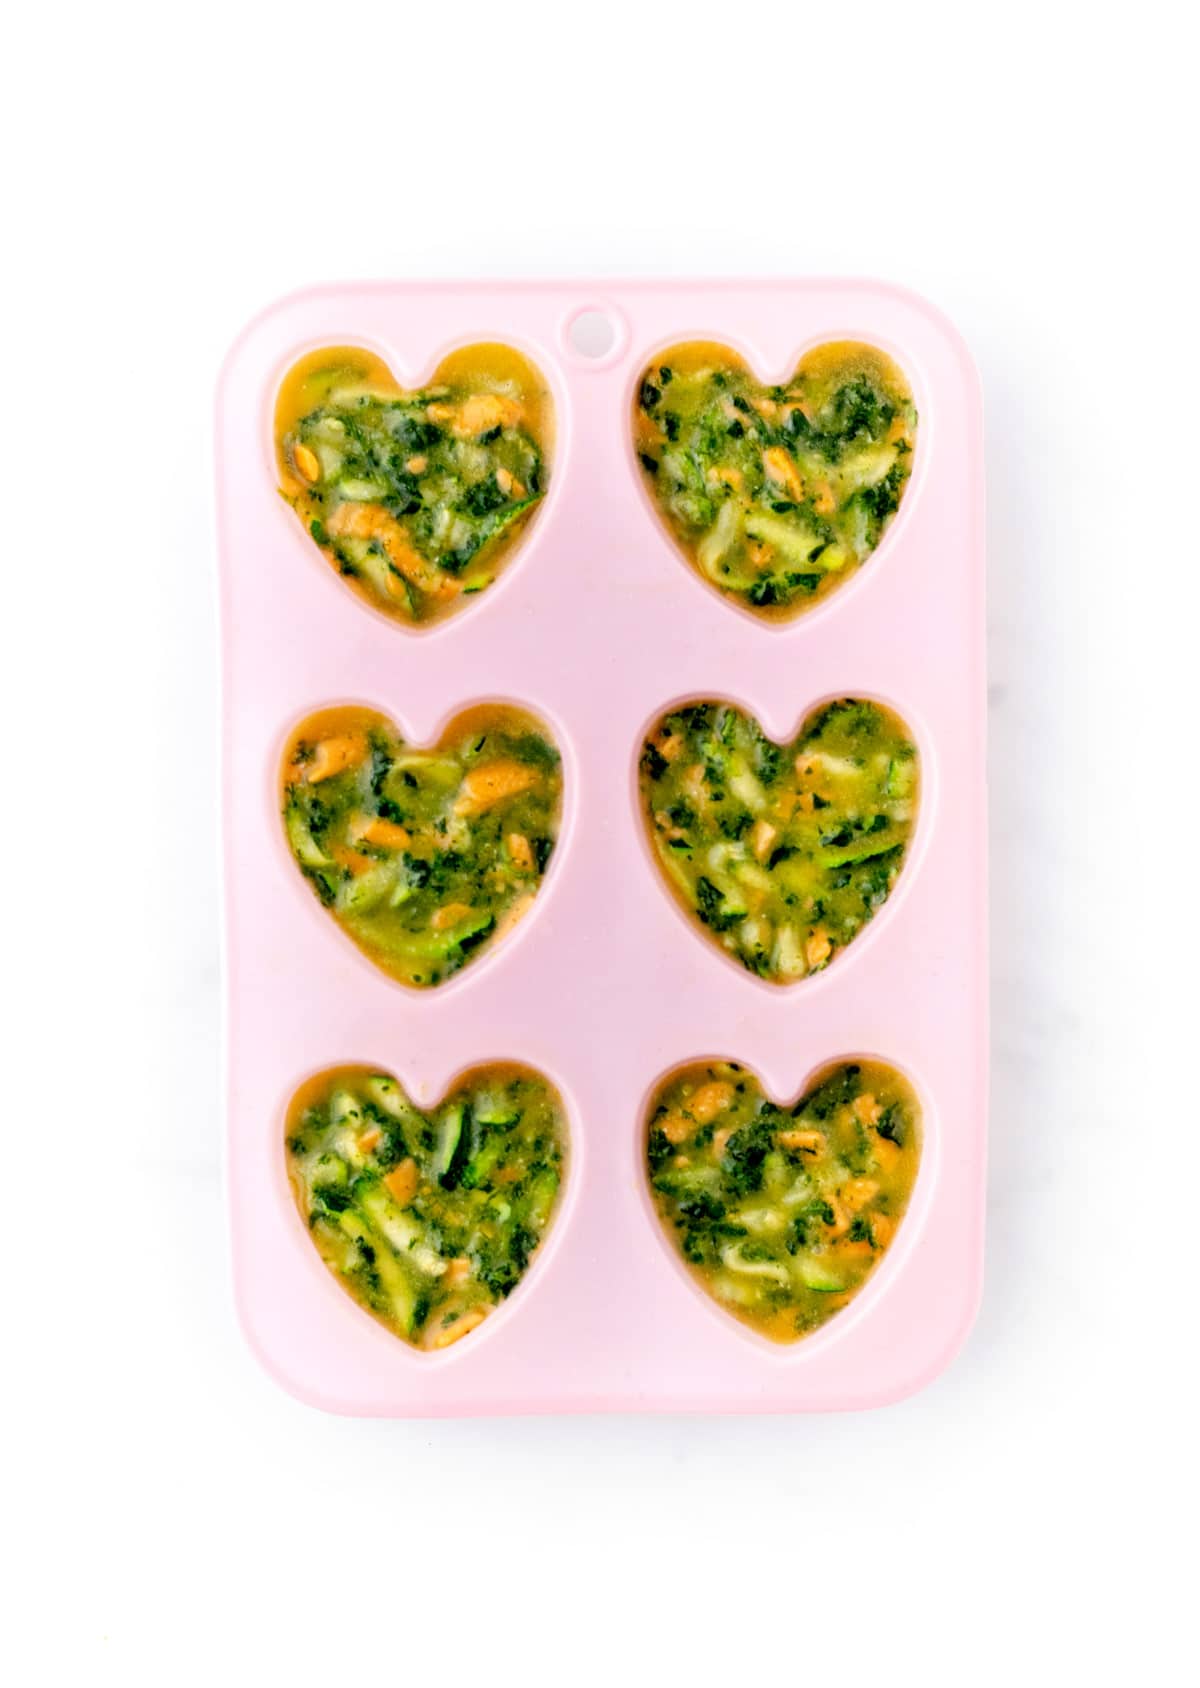 The zucchini frittata muffin mixtures in mini heart-shaped molds.